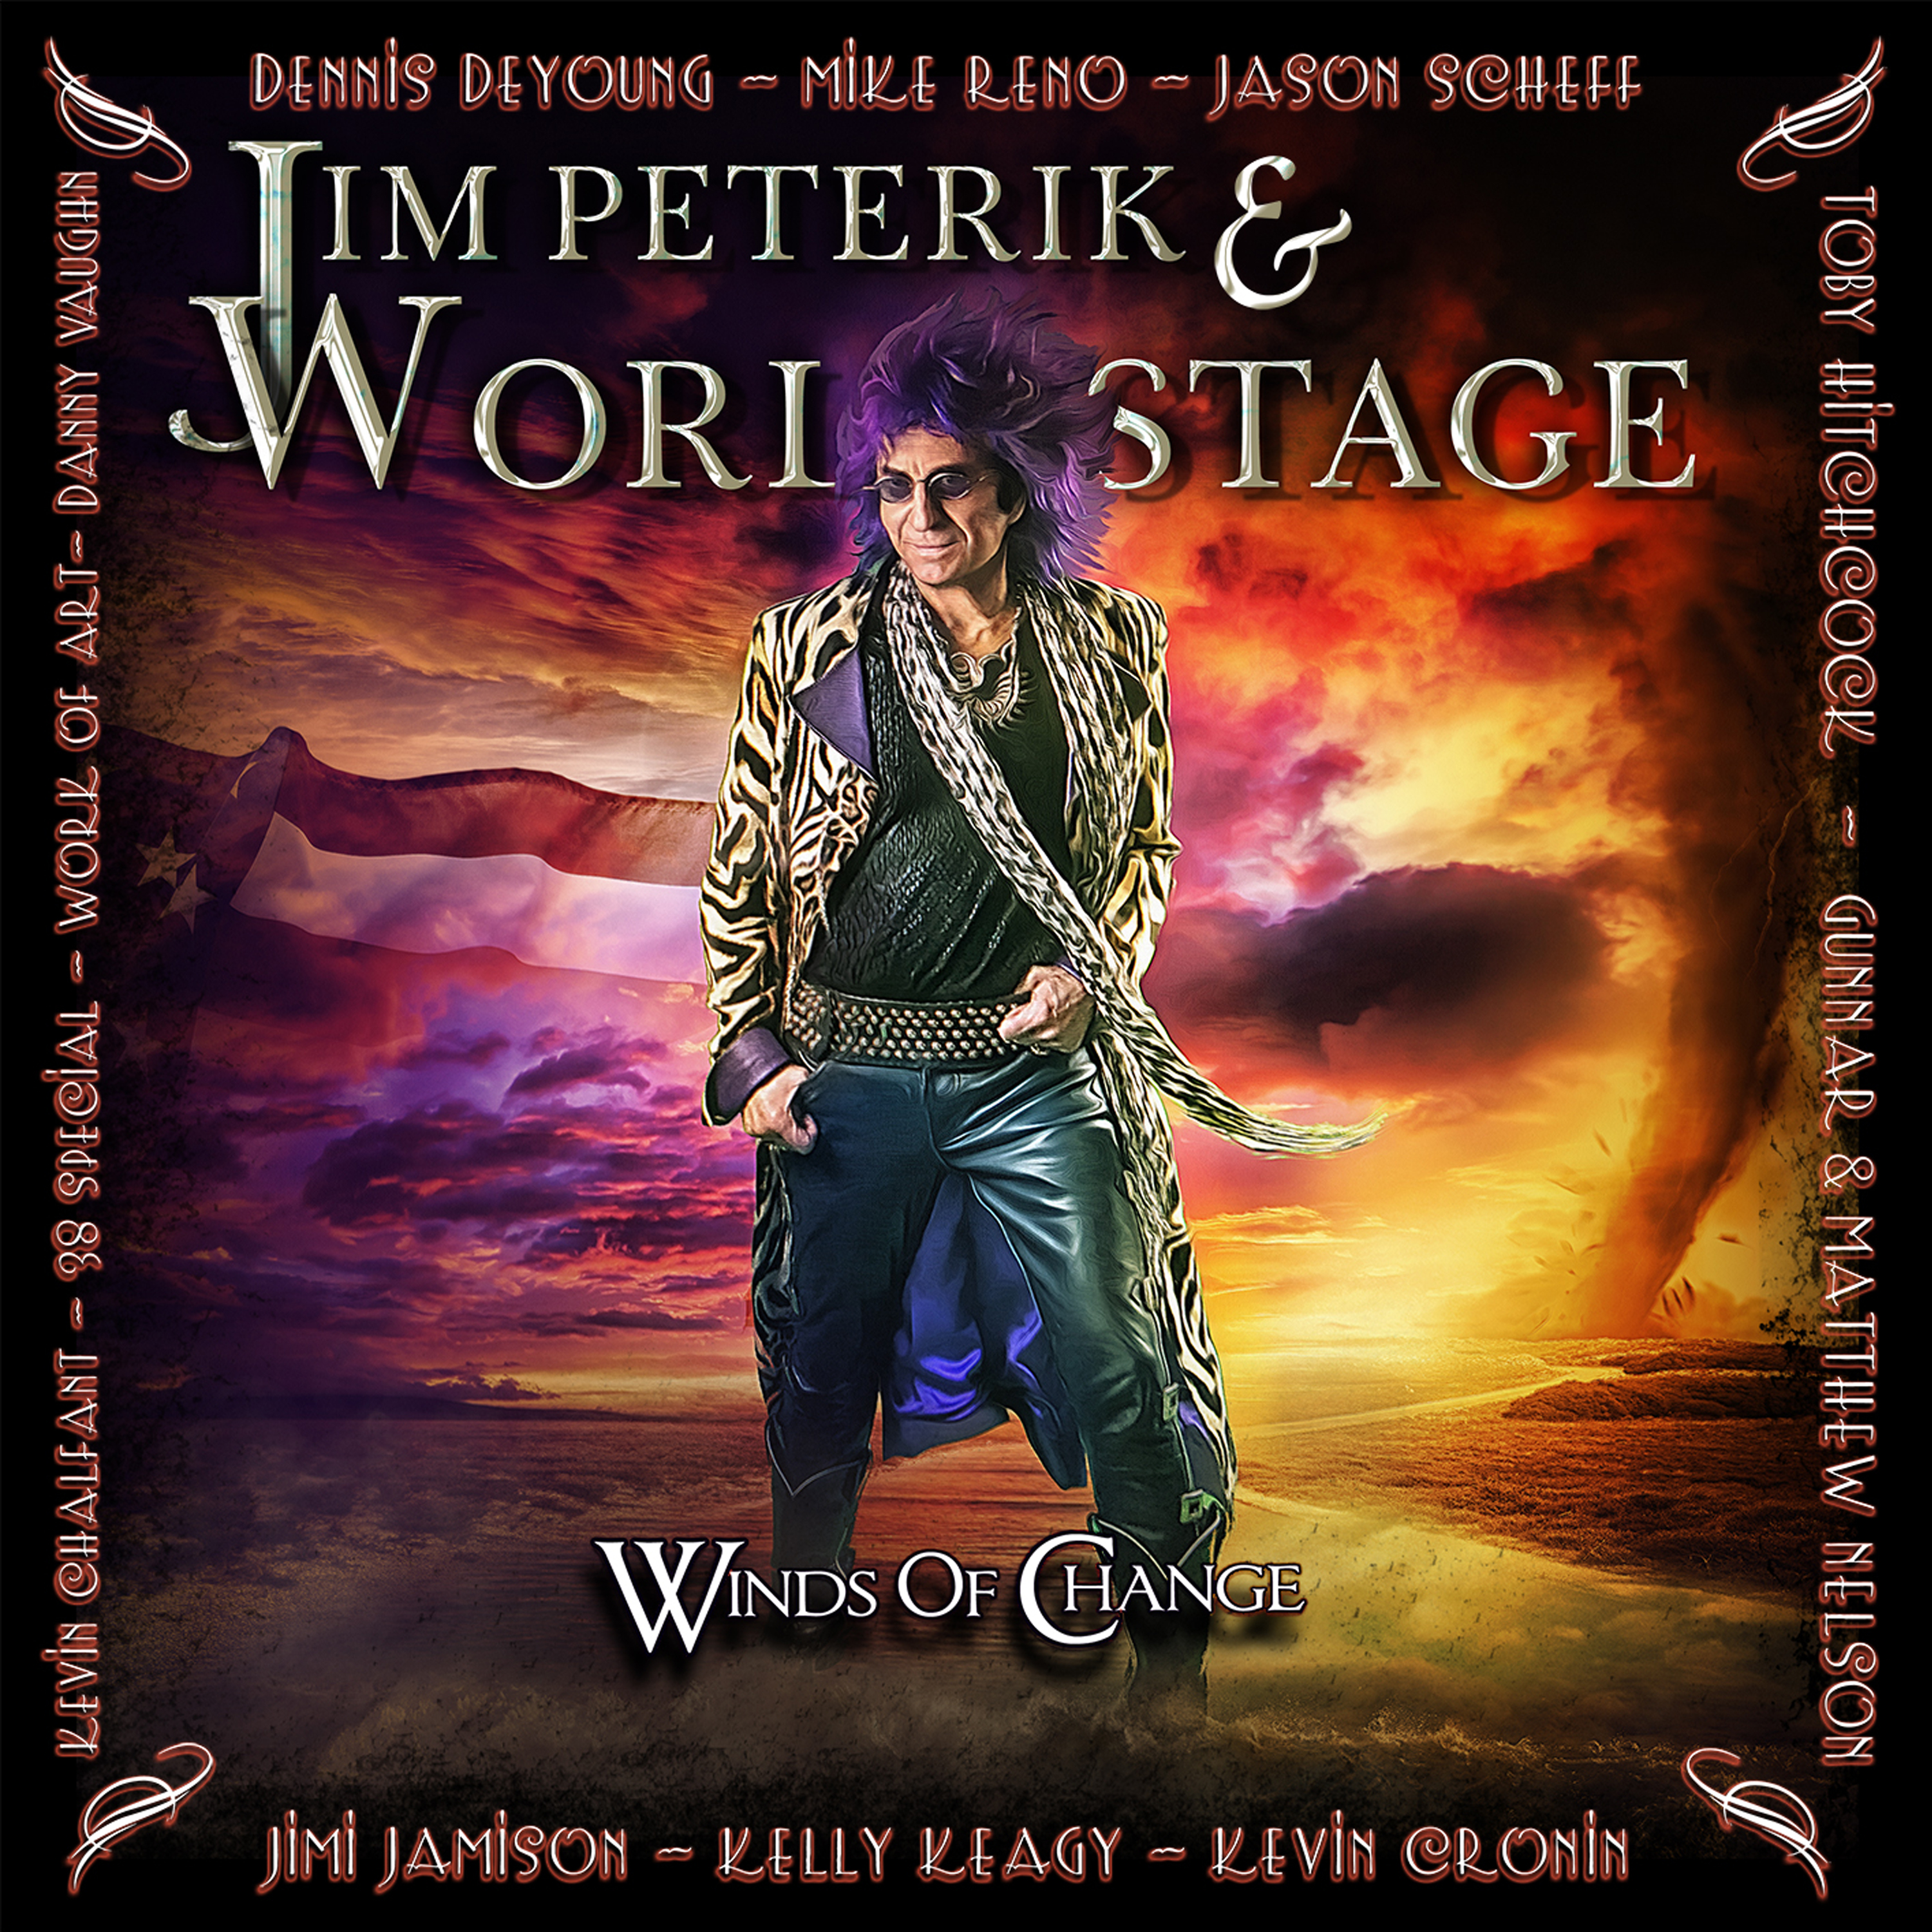 Jim Peterik and World Stage - Winds of Change - CD